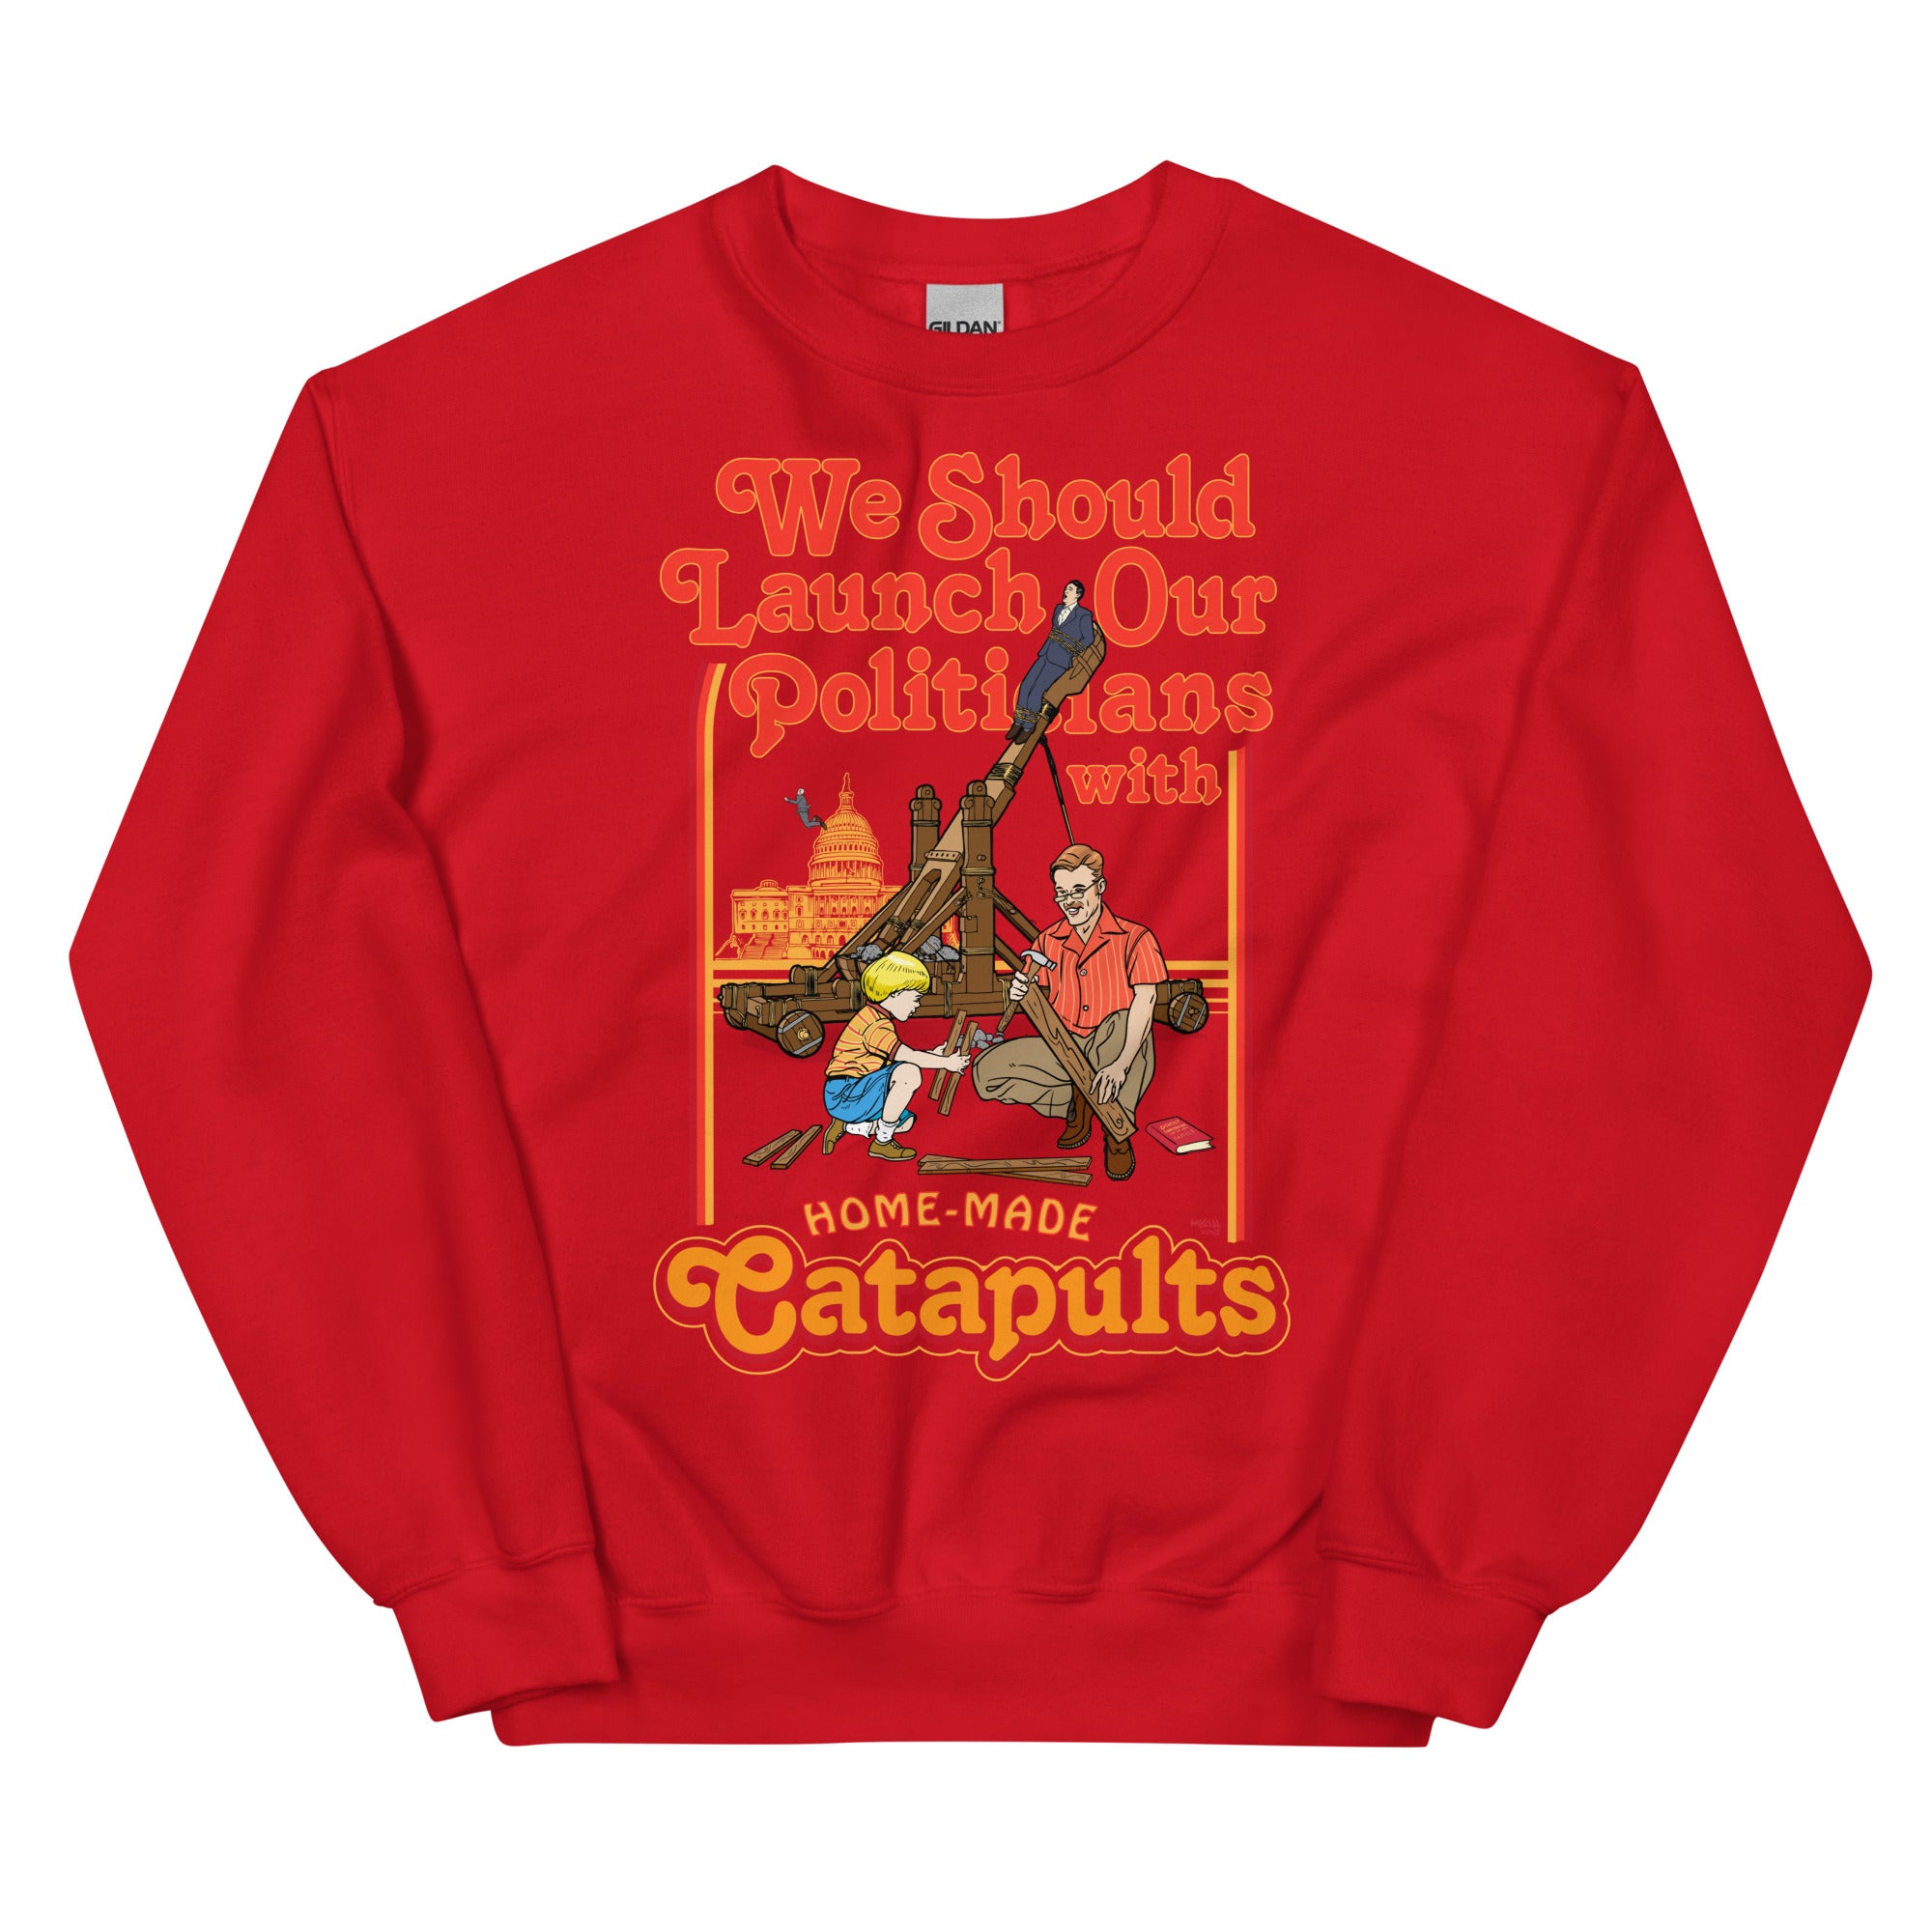 We Should Launch Our Politicians with Homemade Catapults Crewneck Sweatshirt